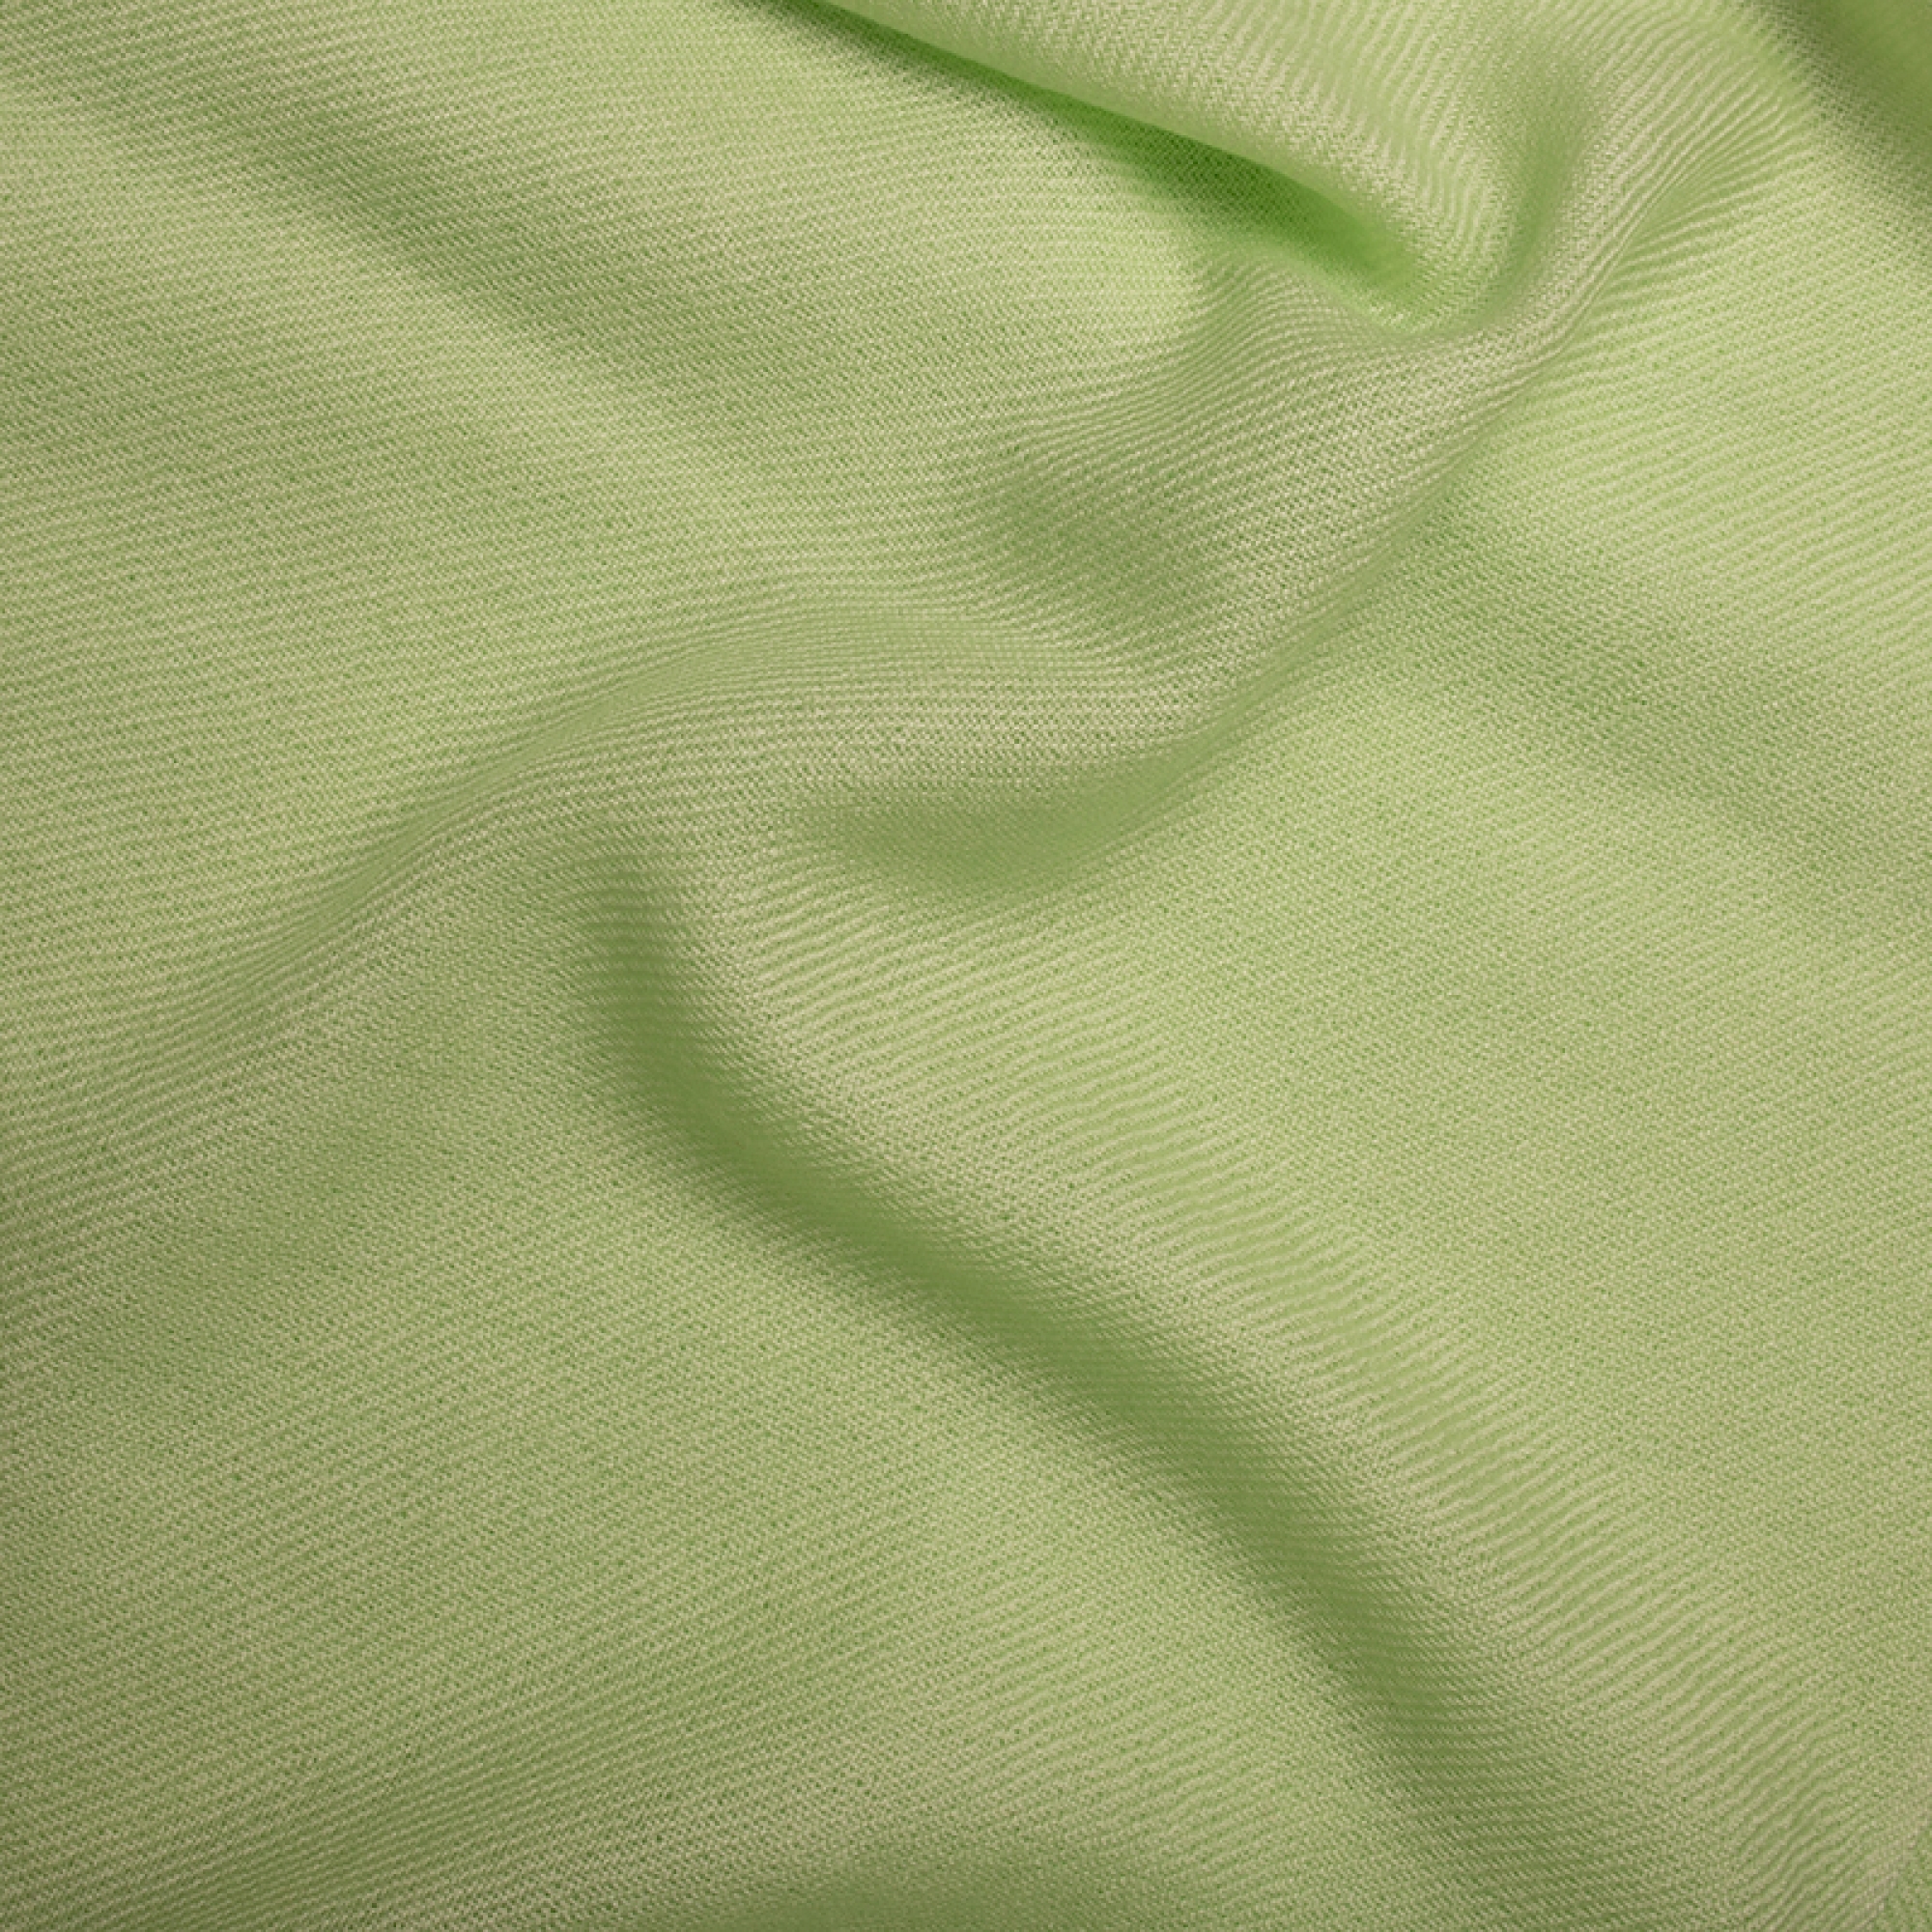 Cashmere accessories cocooning toodoo plain m 180 x 220 lime green 180 x 220 cm